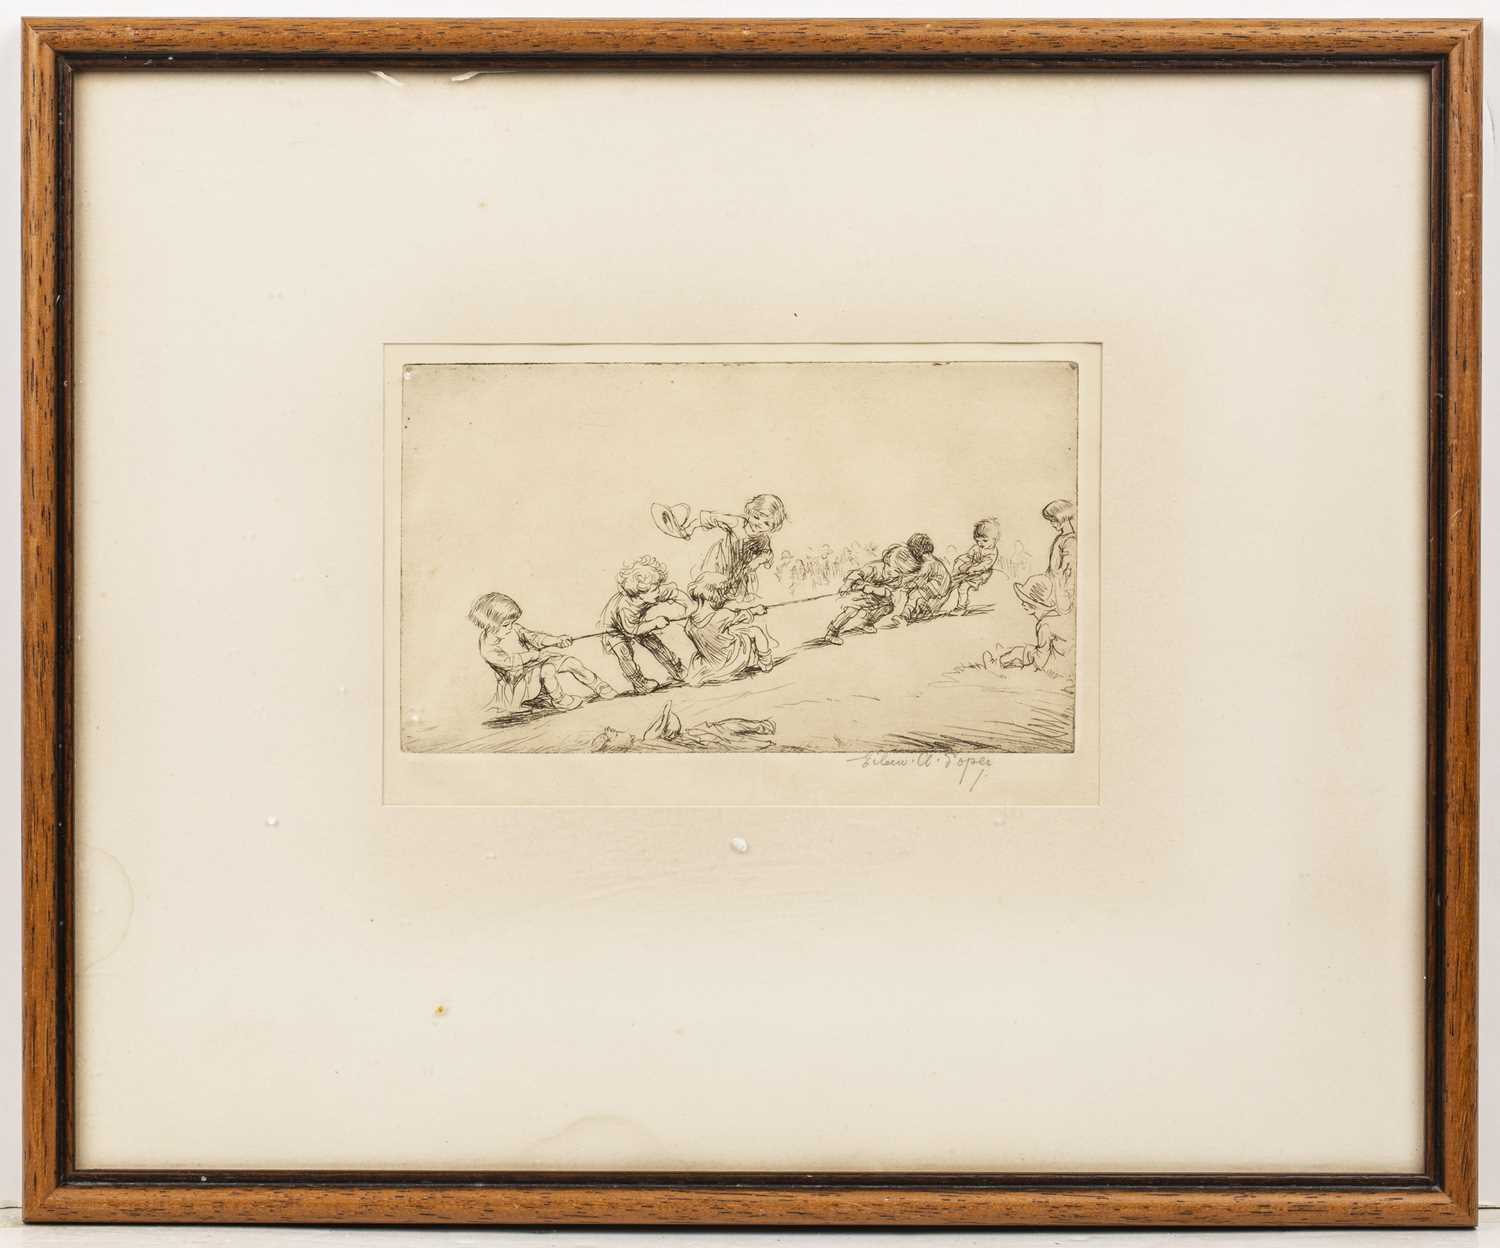 Eileen Soper (1905-1990) 'The Wheelbarrow Race', etching, pencil signed in the margin, 10 x 17. - Image 5 of 6